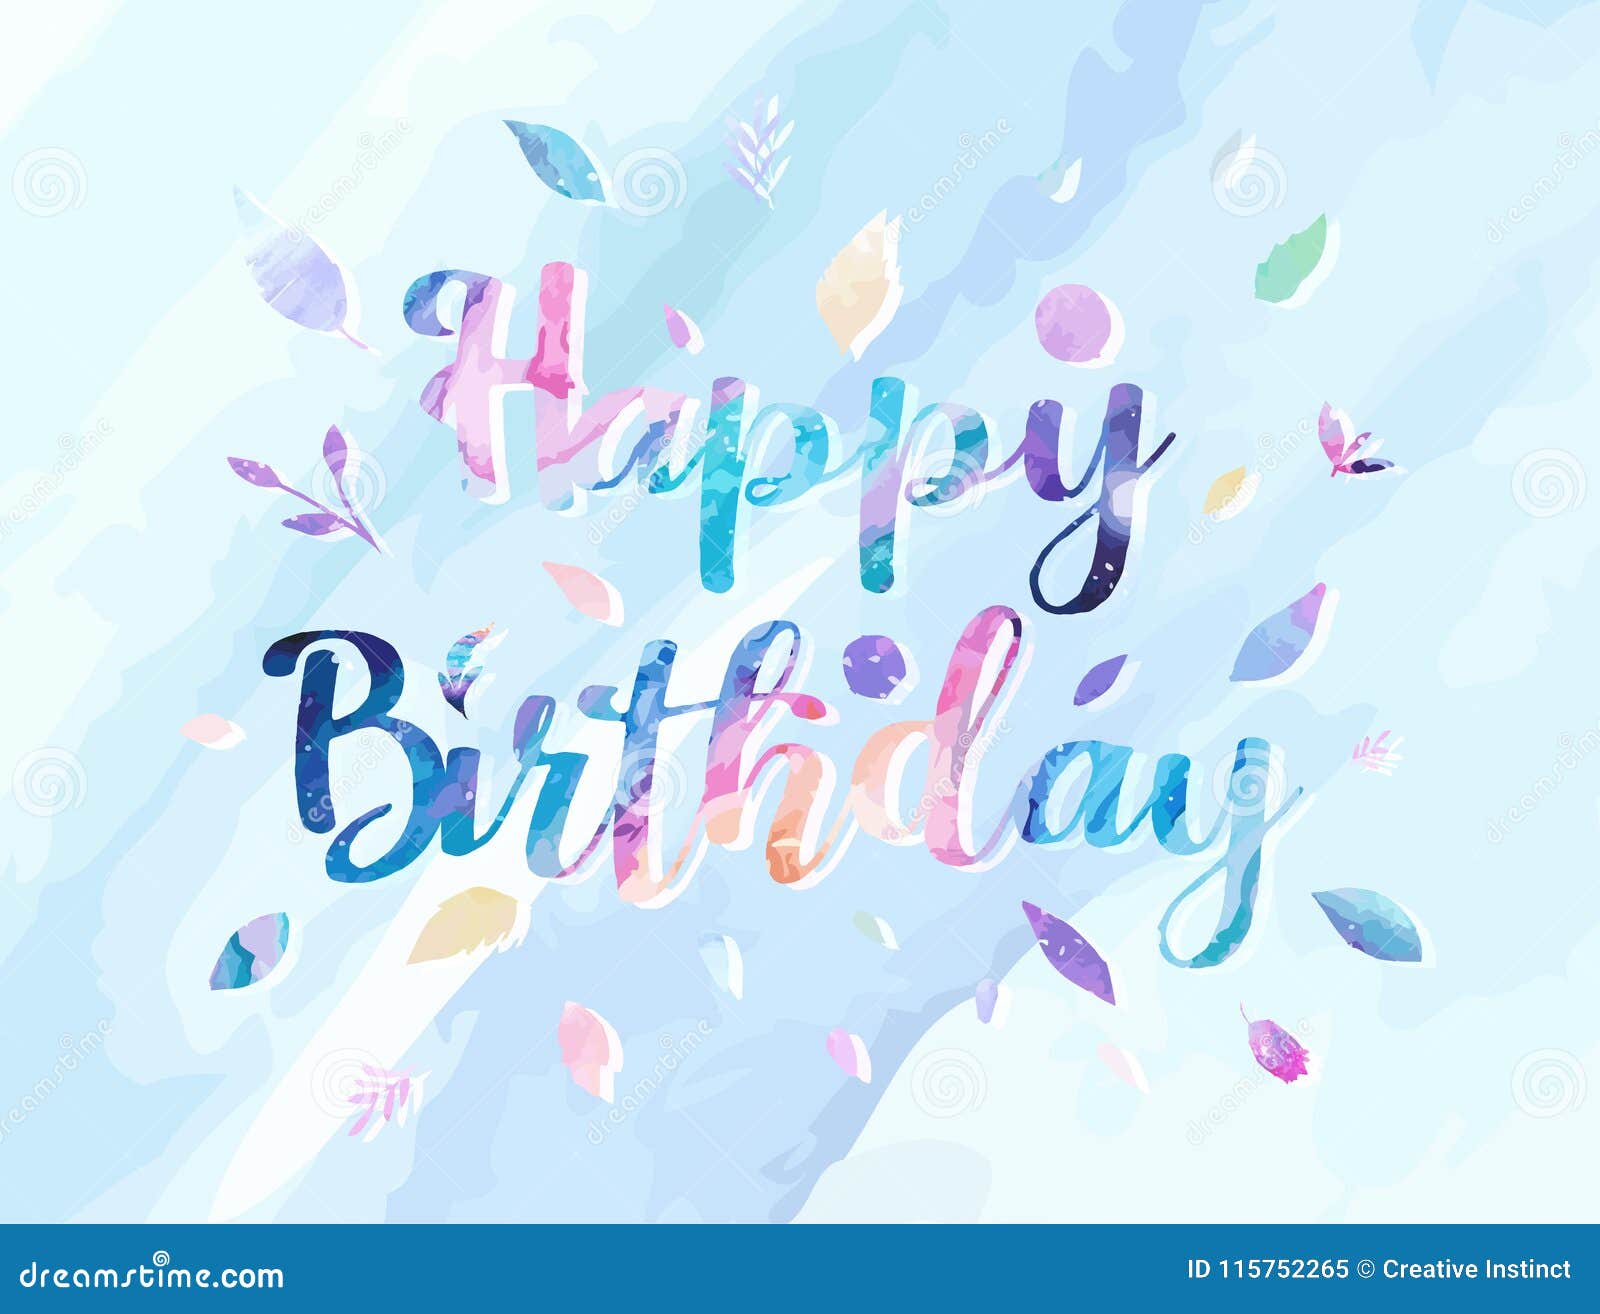 Happy Birthday Background Vector Illustration with Watercolor ...